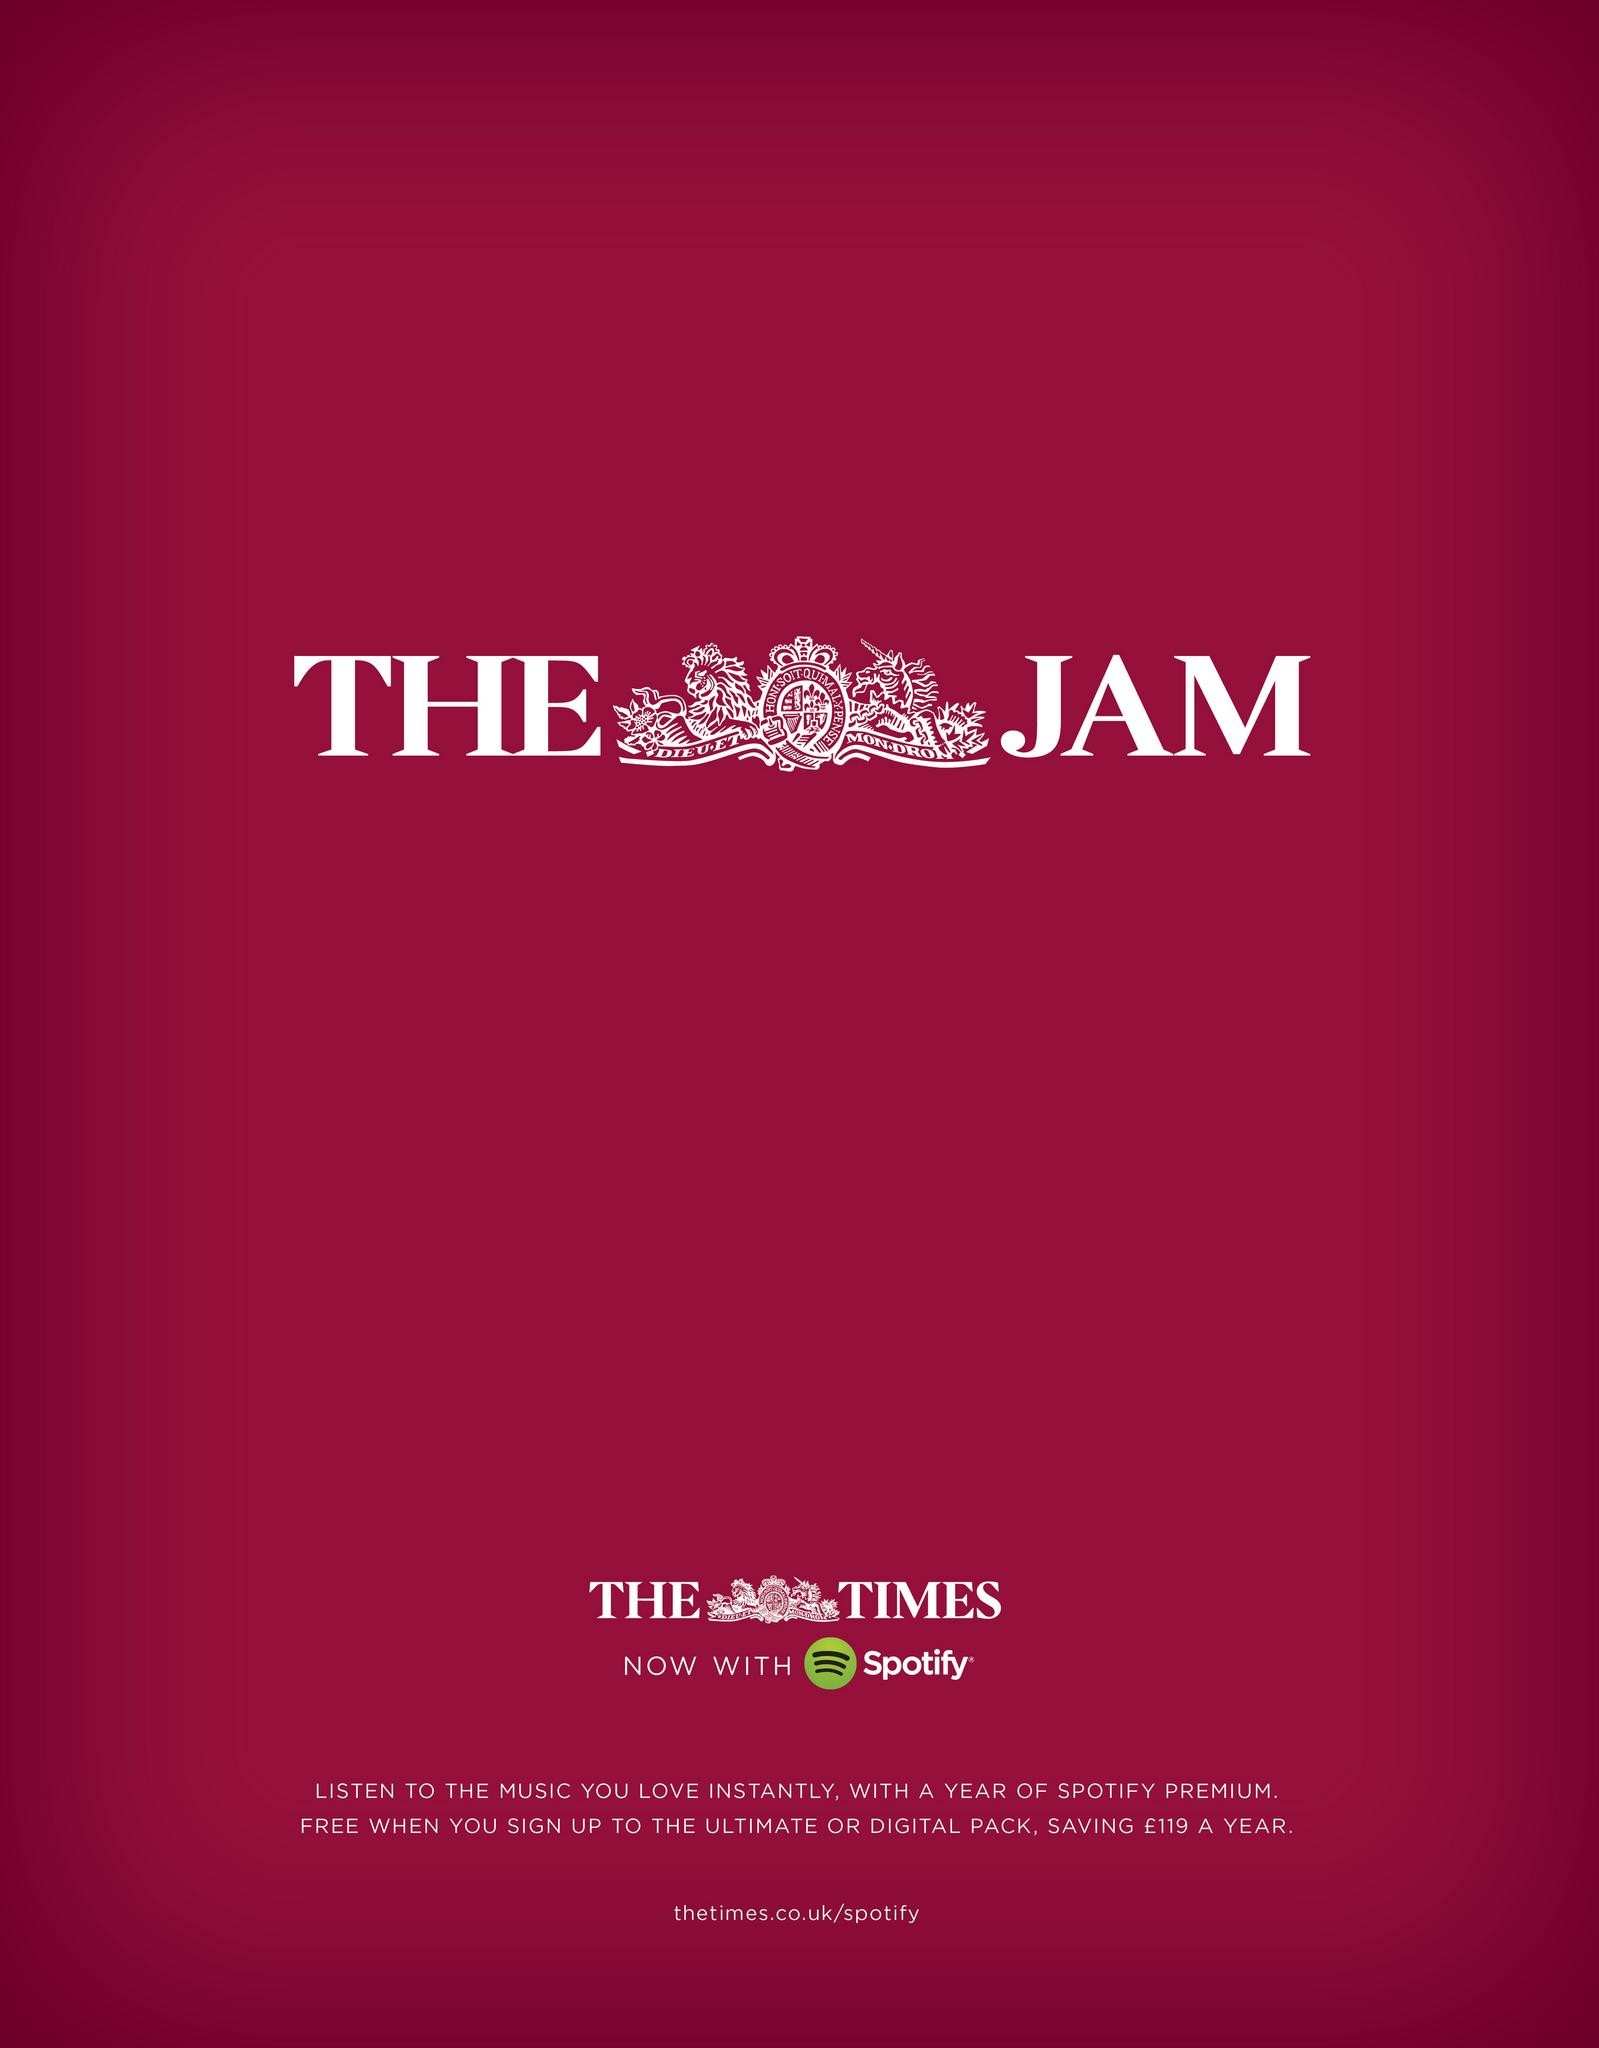 THE TIMES APP. NOW WITH SPOTIFY.